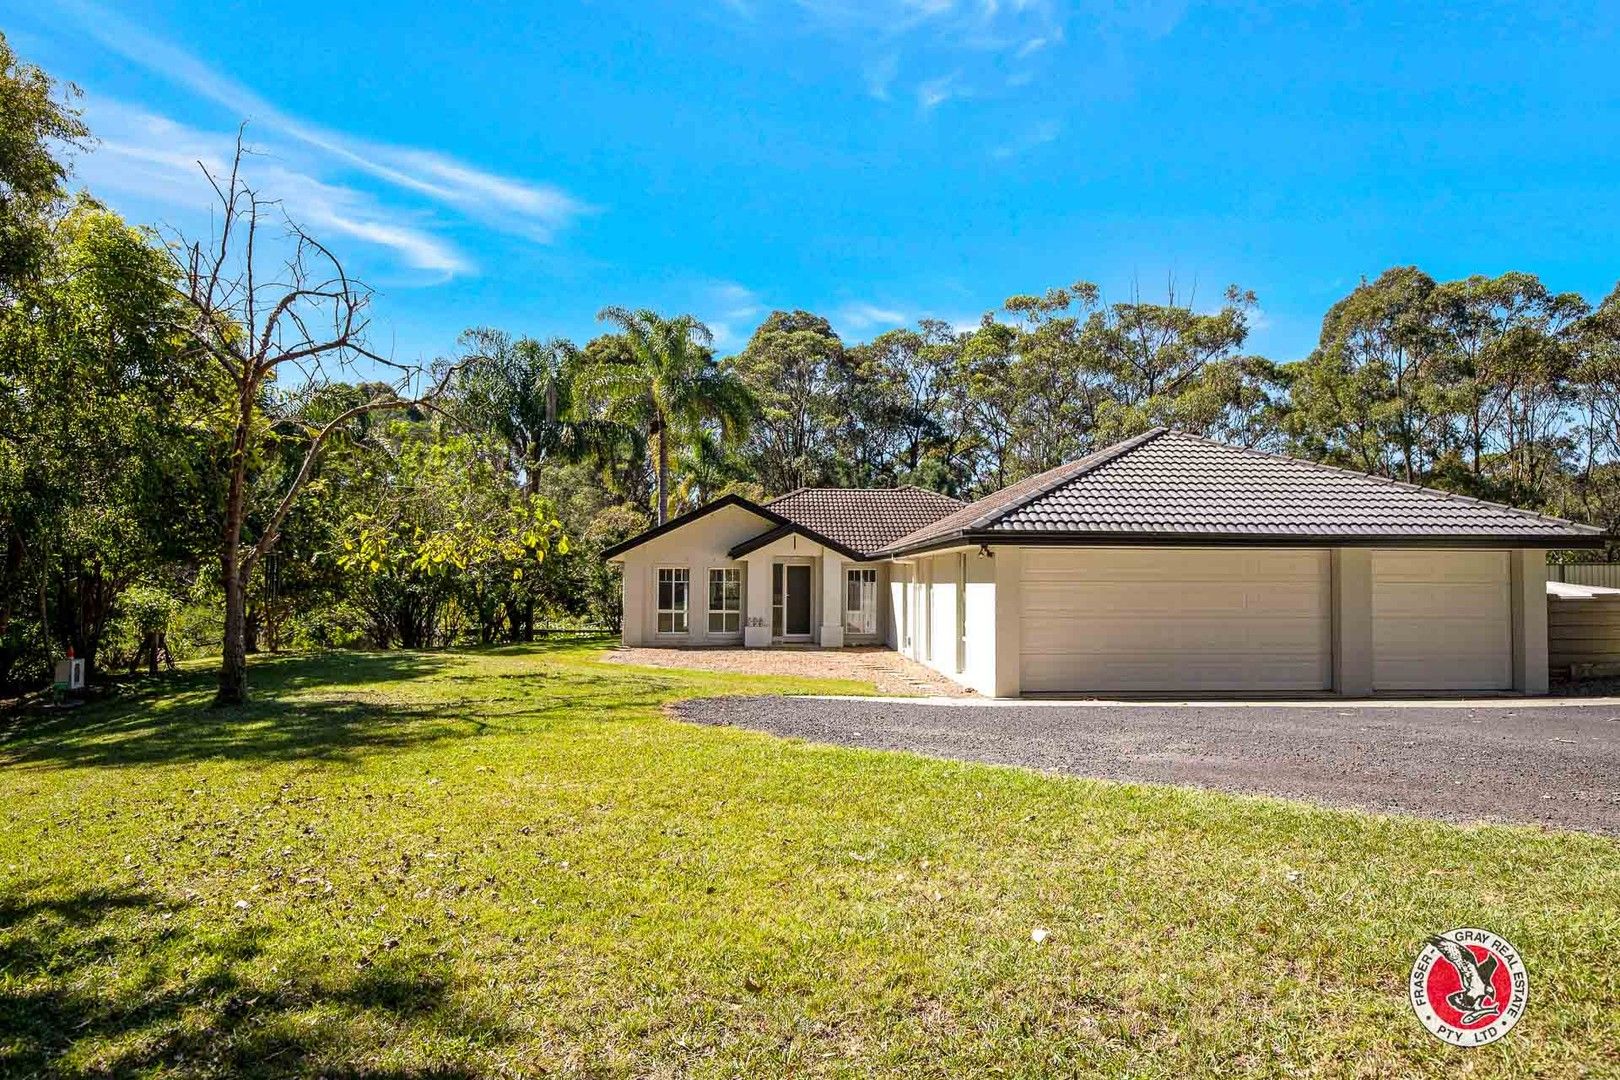 4 bedrooms House in 6-18 Brown Close MORUYA HEADS NSW, 2537